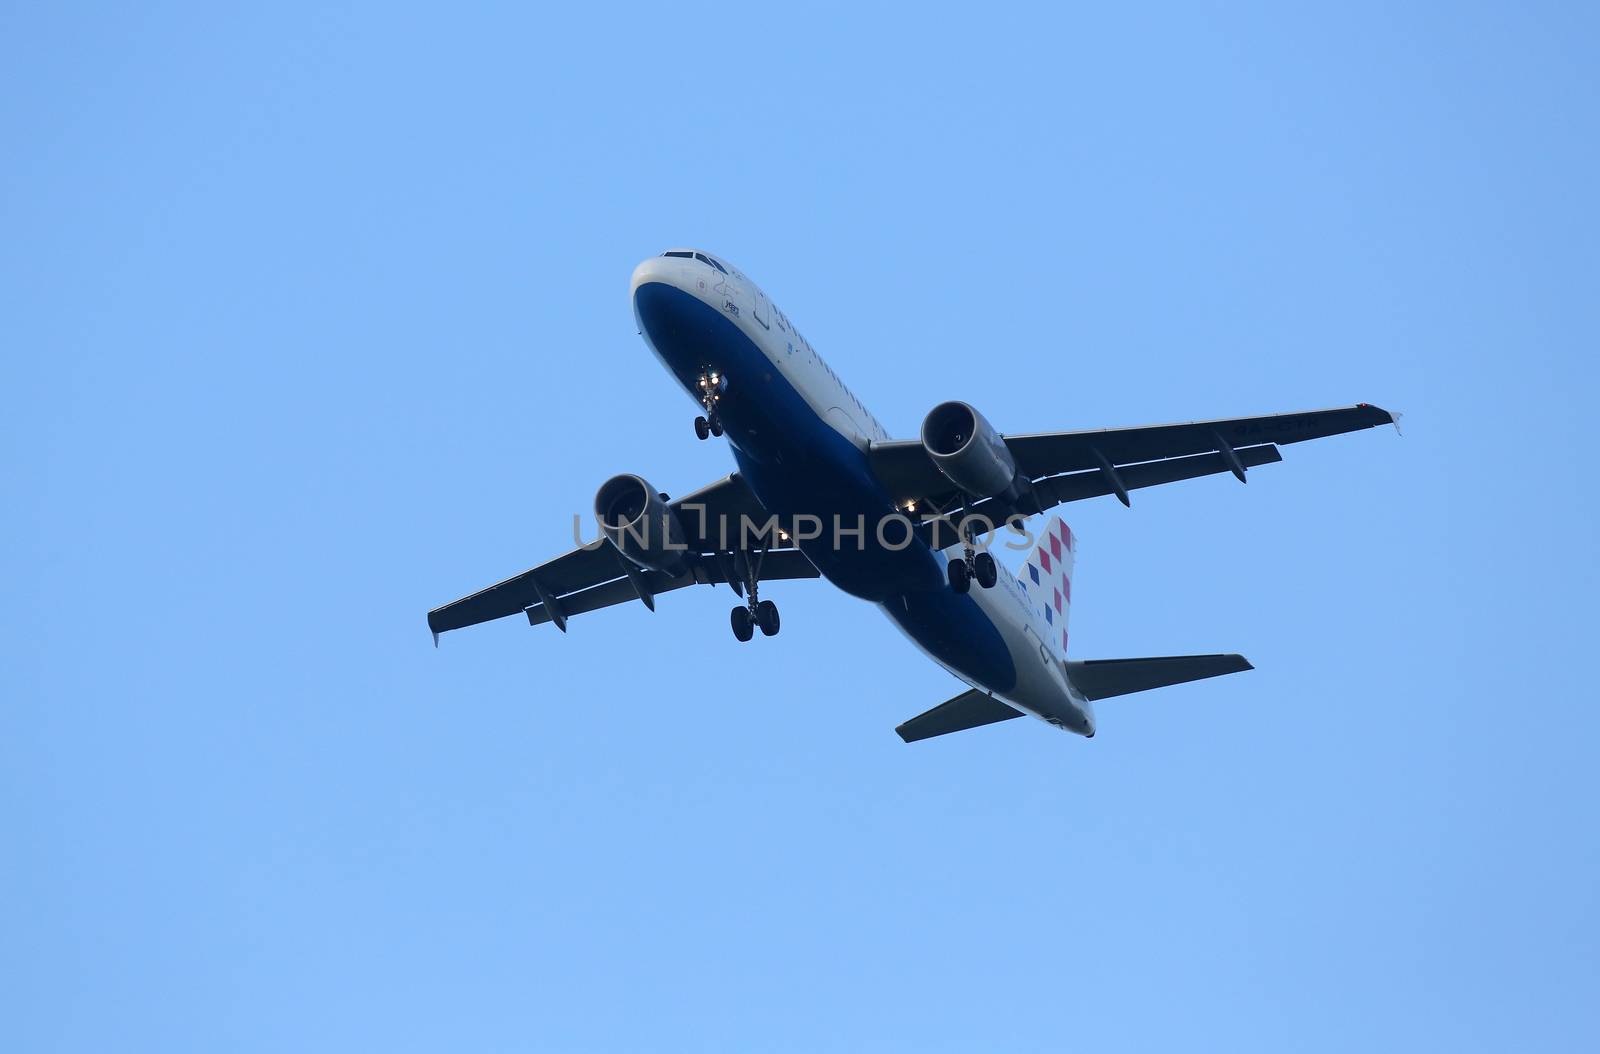 Airbus A320, registration 9A-CTK of Croatia Airlines landing at Zagreb Airport Pleso